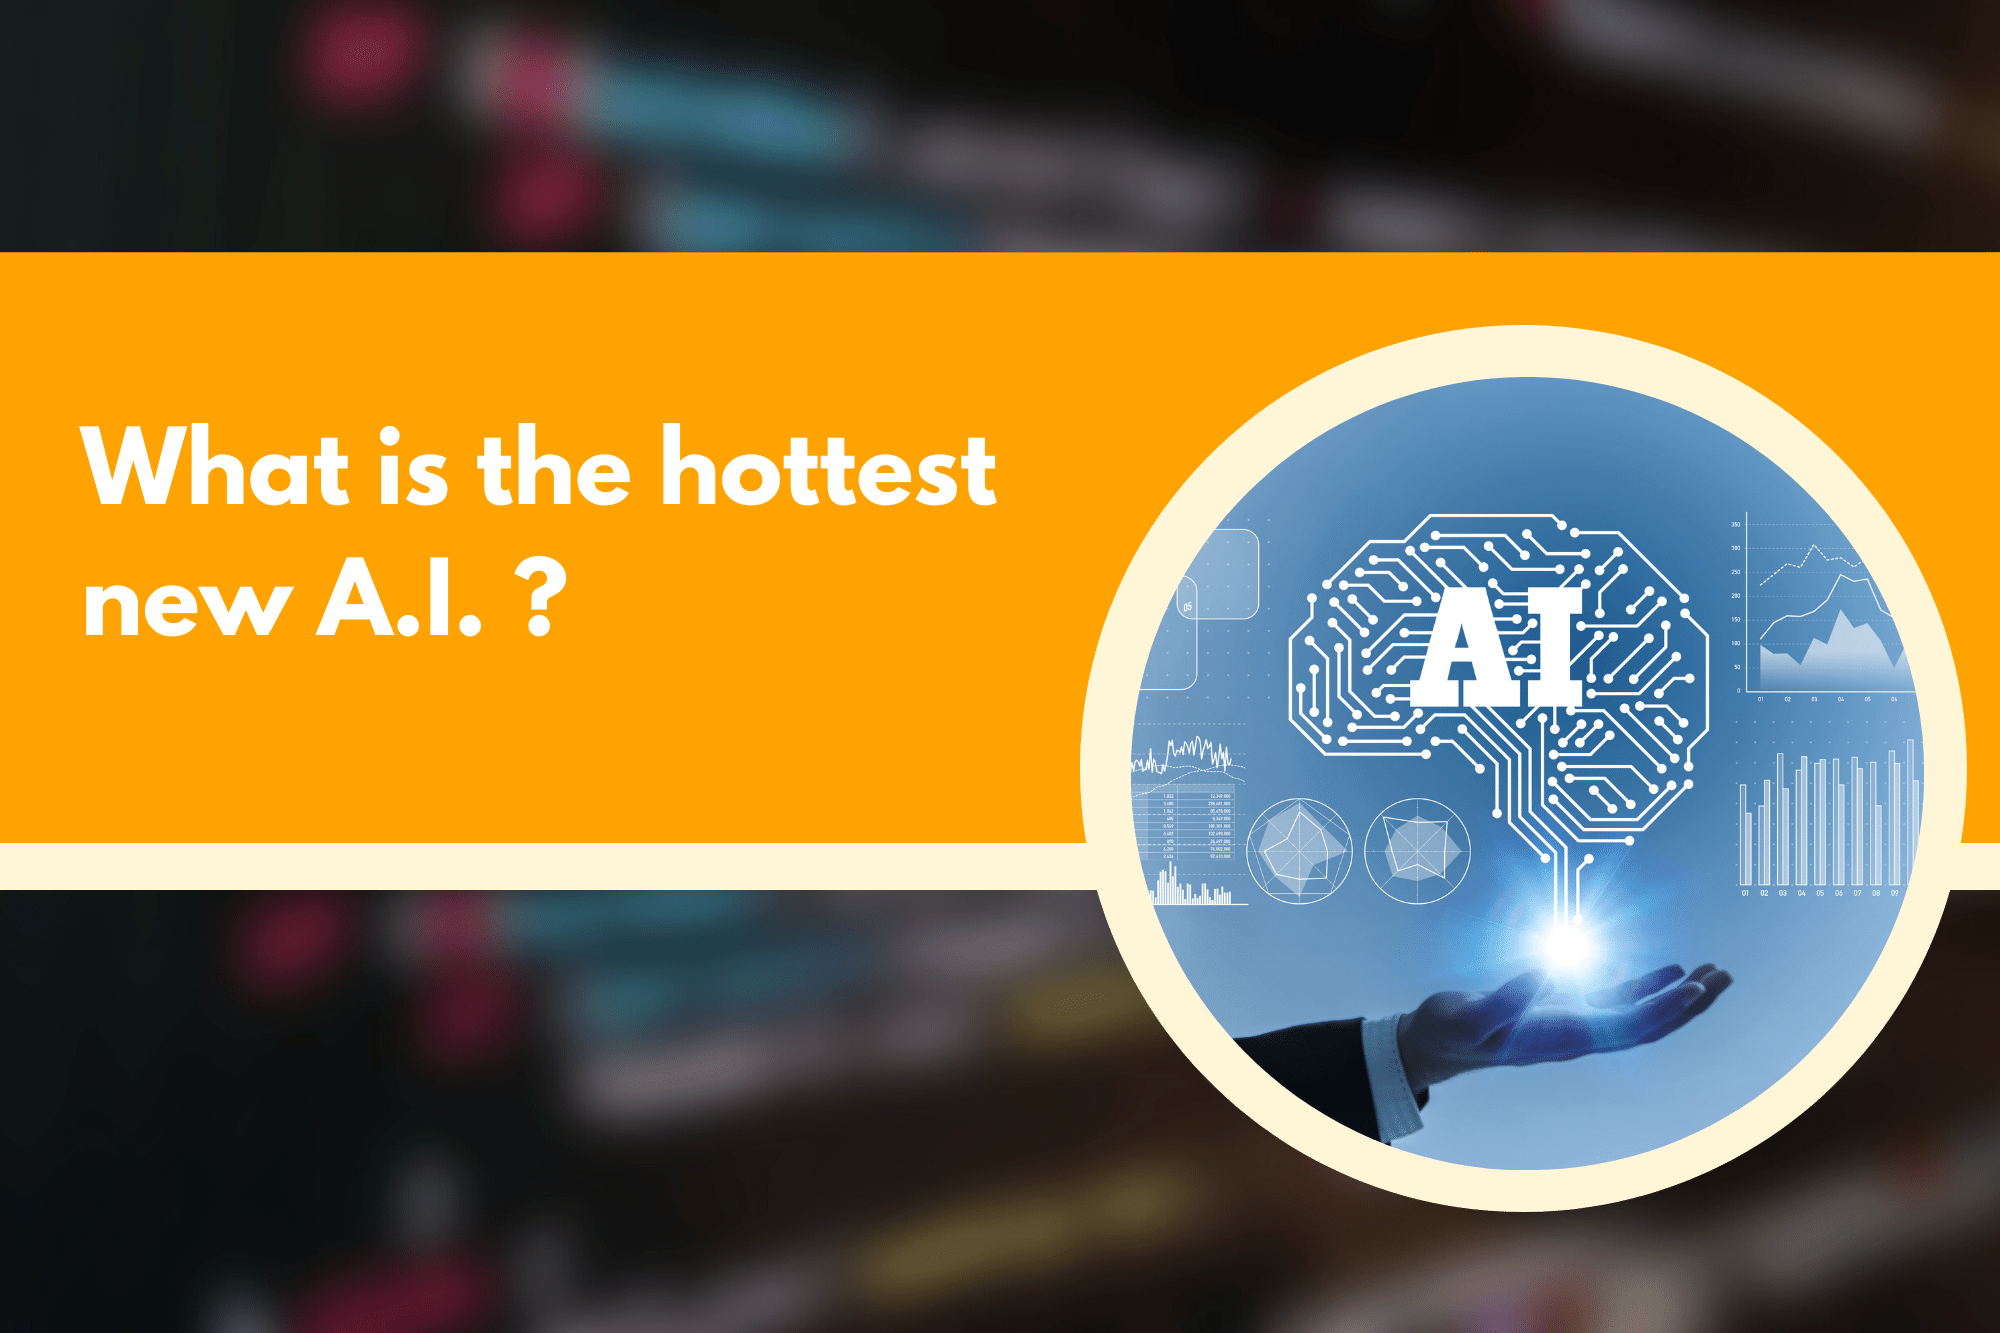 What is the hottest new A.I